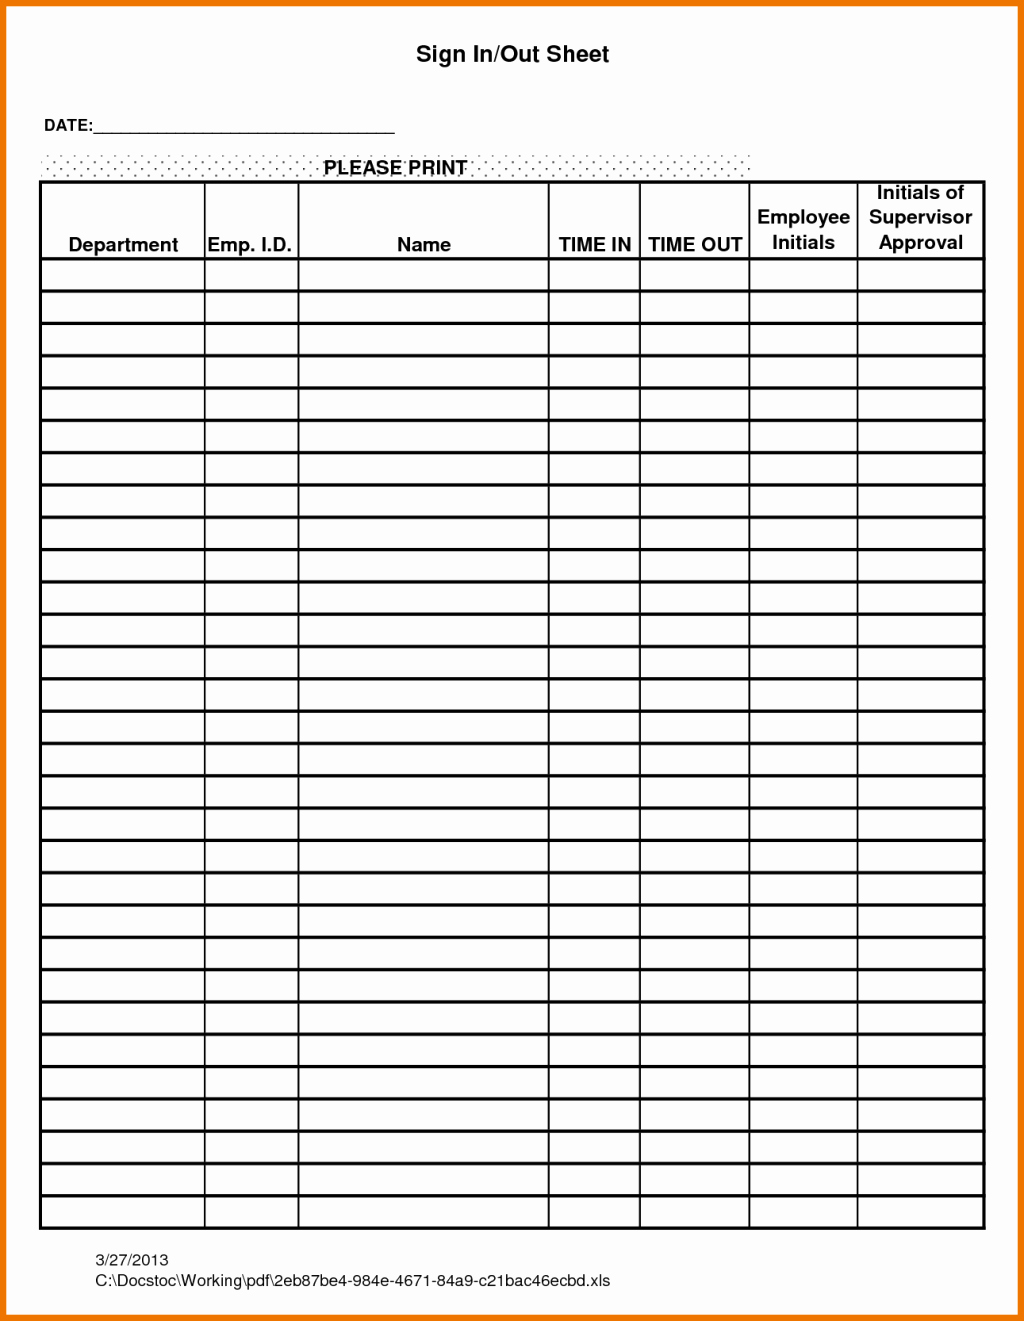 Sign In and Out Sheet Luxury Interesting Employee attendance Sign In Sheet with